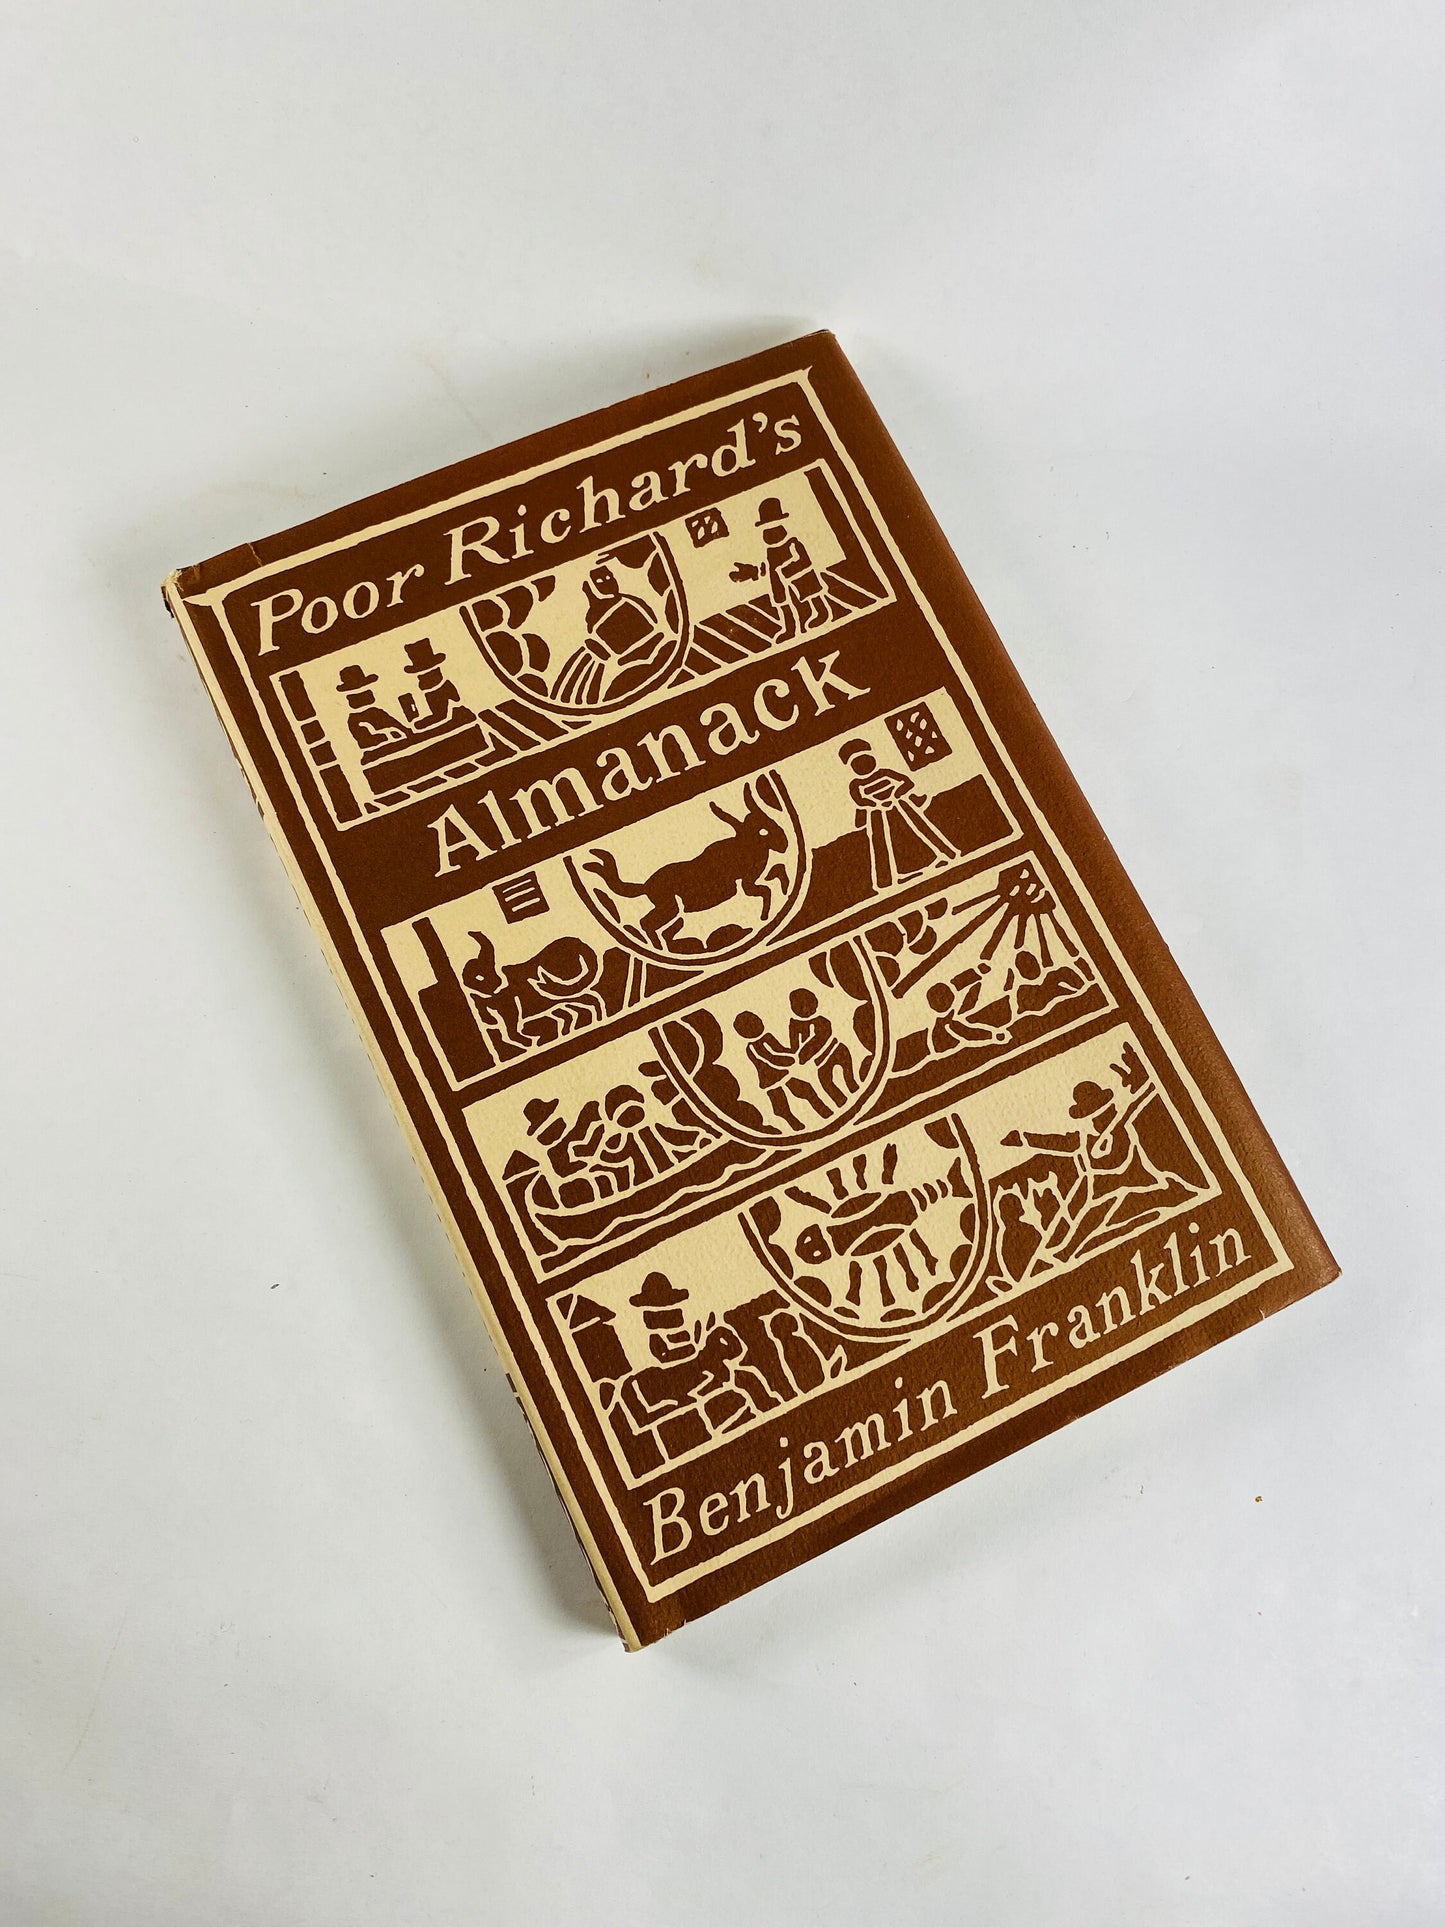 1932 Poor Richard's Almanack vintage Benjamin Franklin book reprinted by Peter Pauper Press with dust jacket. Father's Day gift collectible